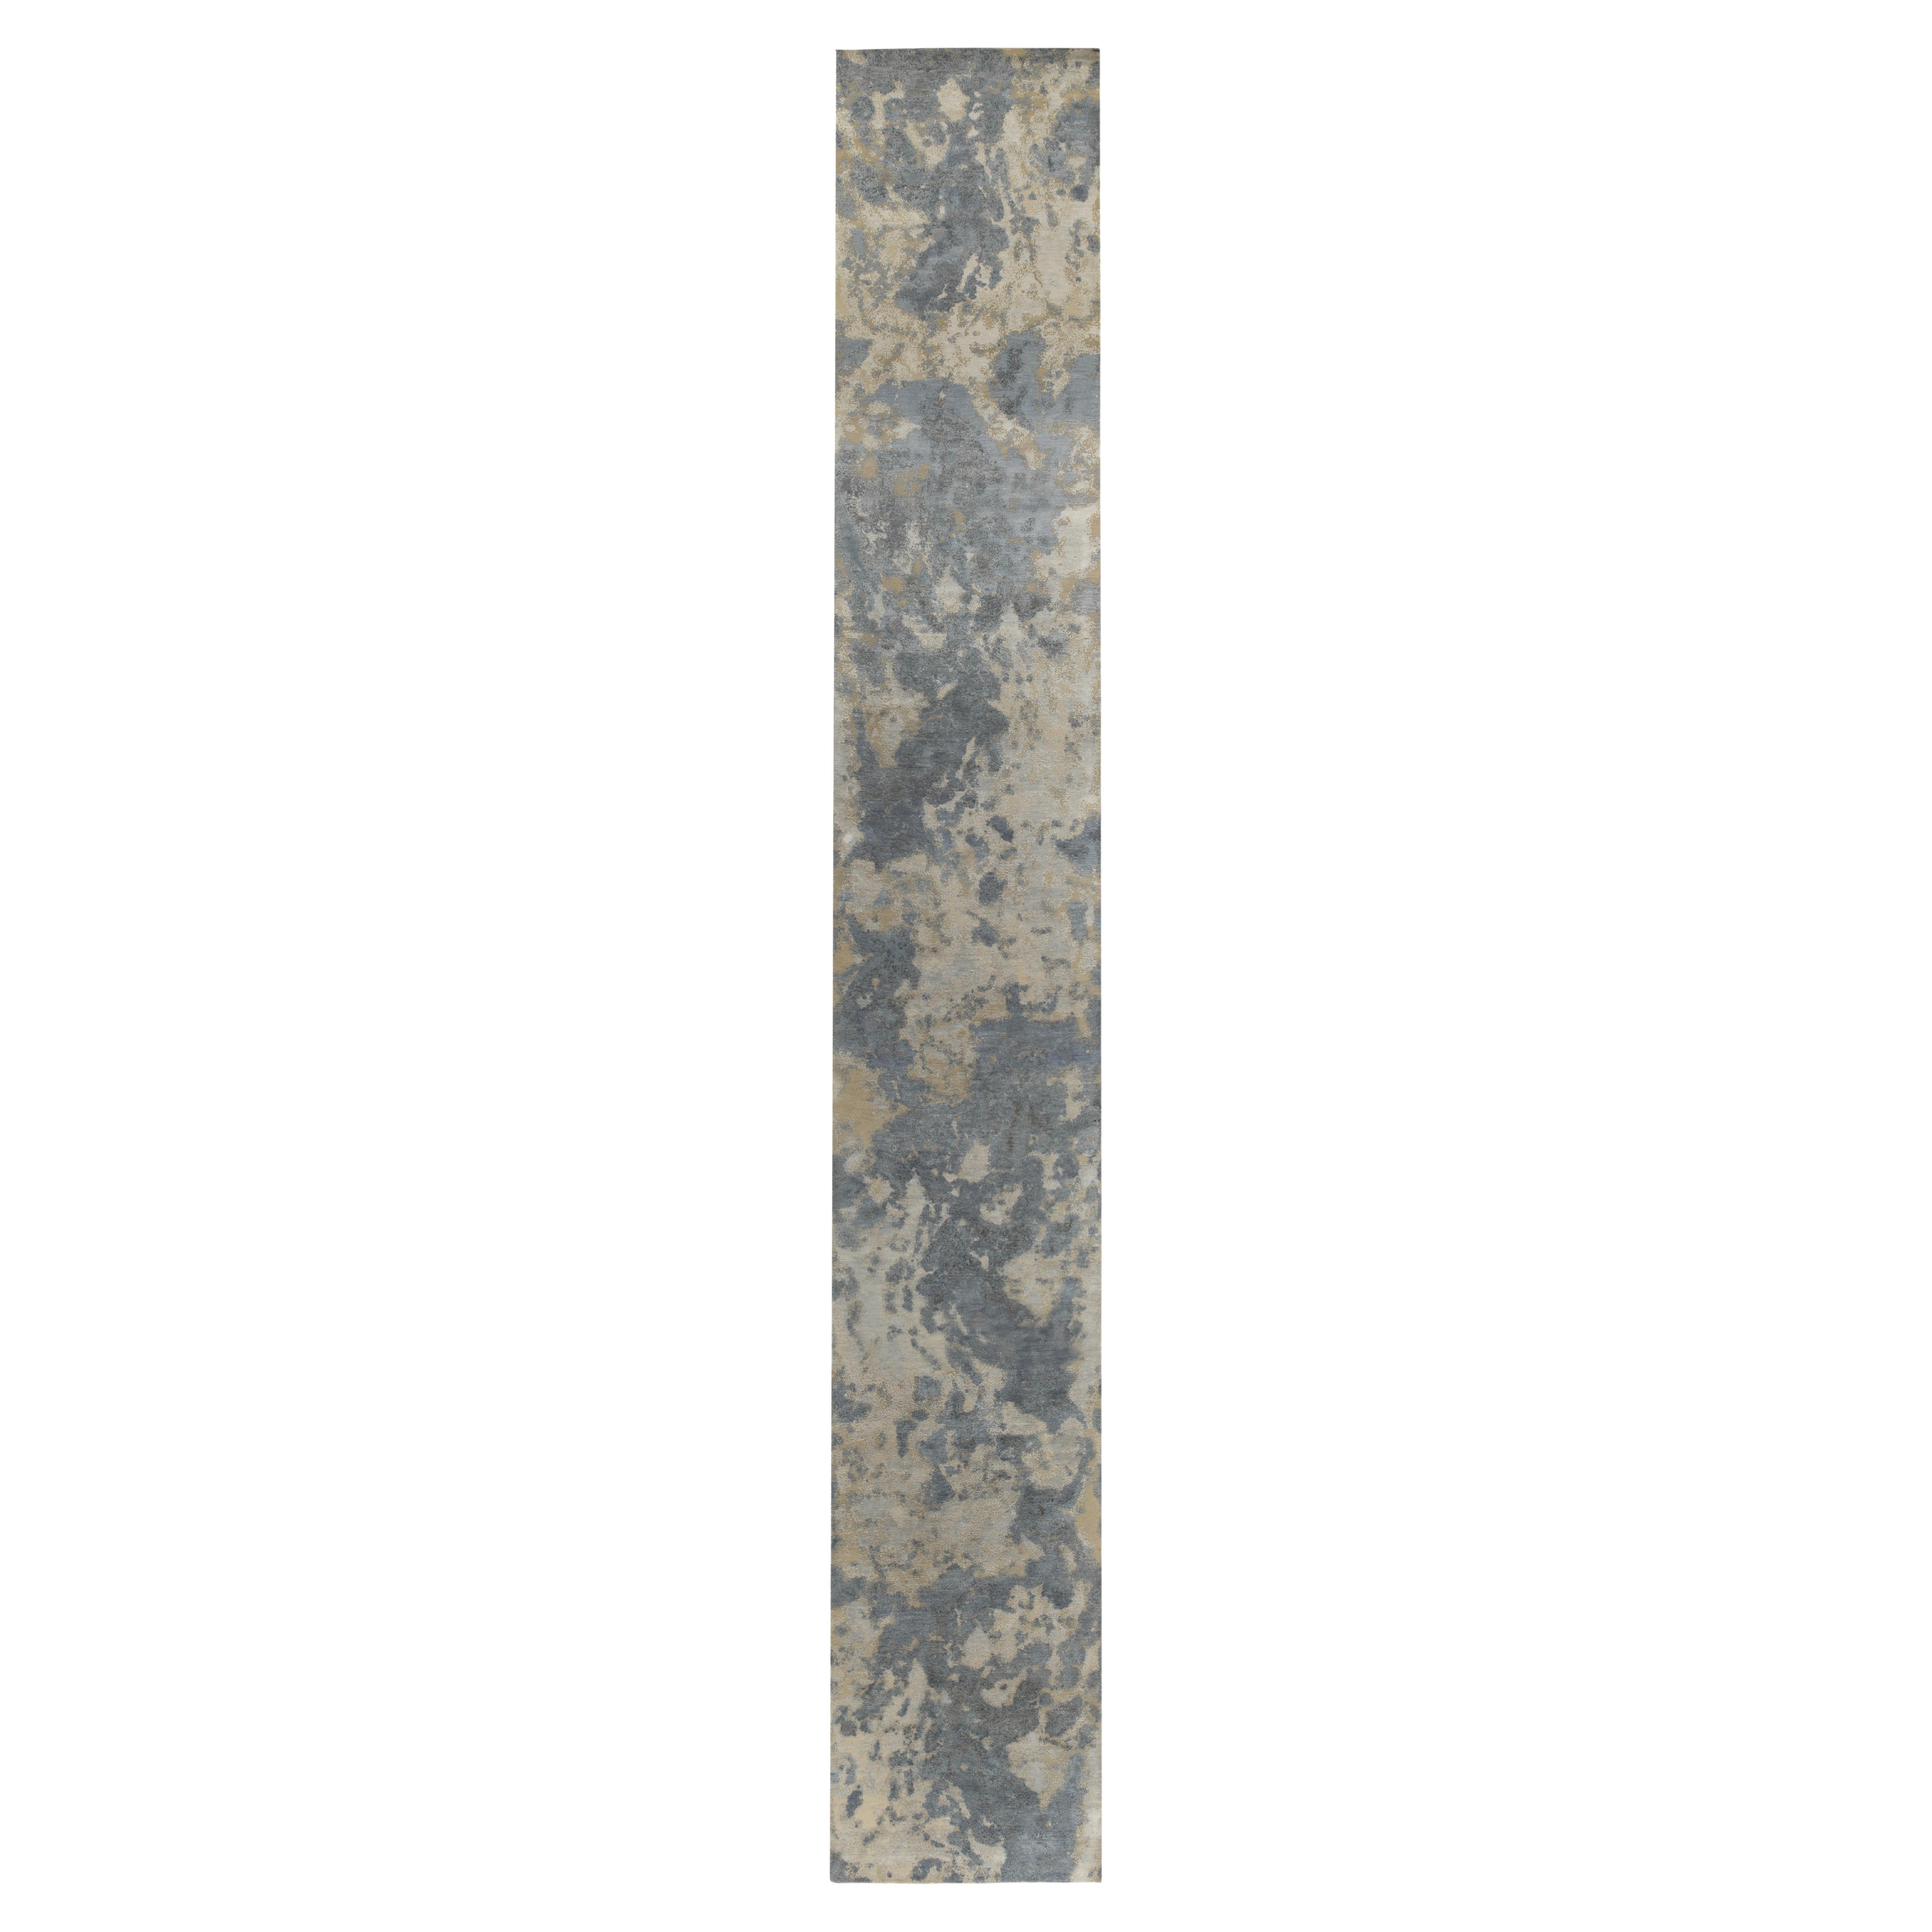 Rug & Kilim’s Custom Abstract Runner in Textural Blue and Silver-Gray Patters